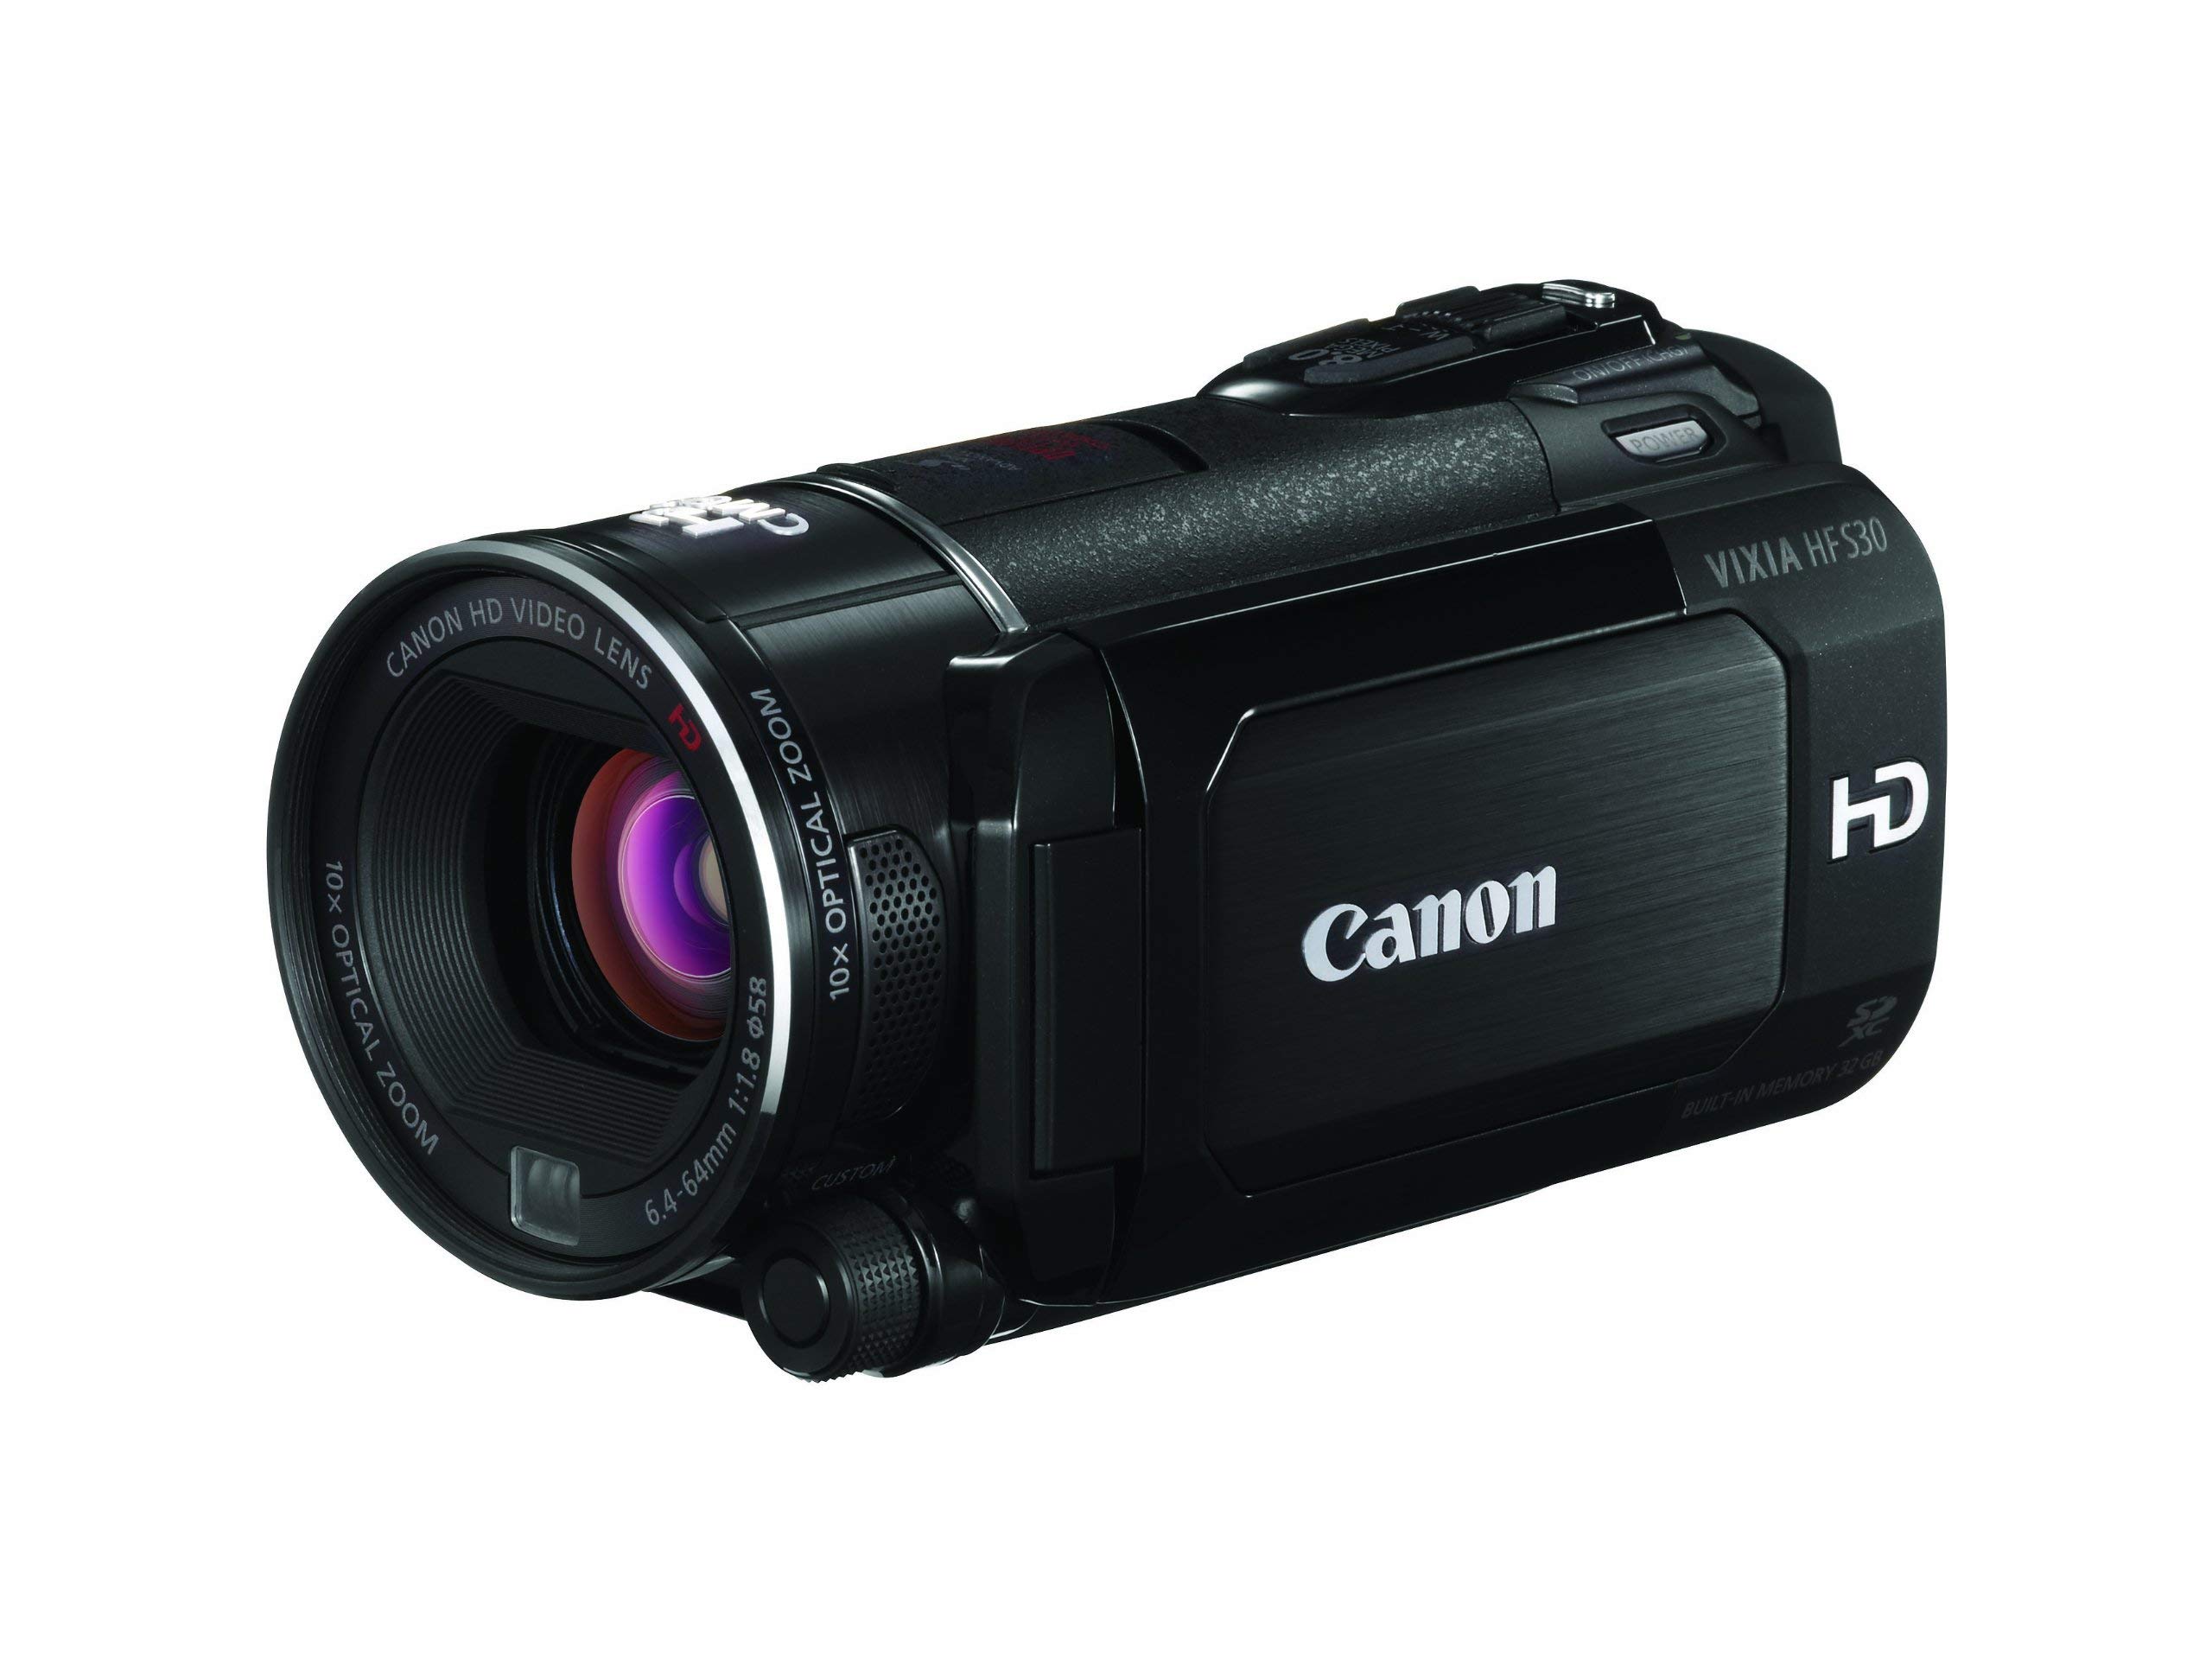 Canon VIXIA HF S30 Flash Memory Camcorder with SuperRange Optical Image Stabilizer with Powered IS (Certified Refurbished)